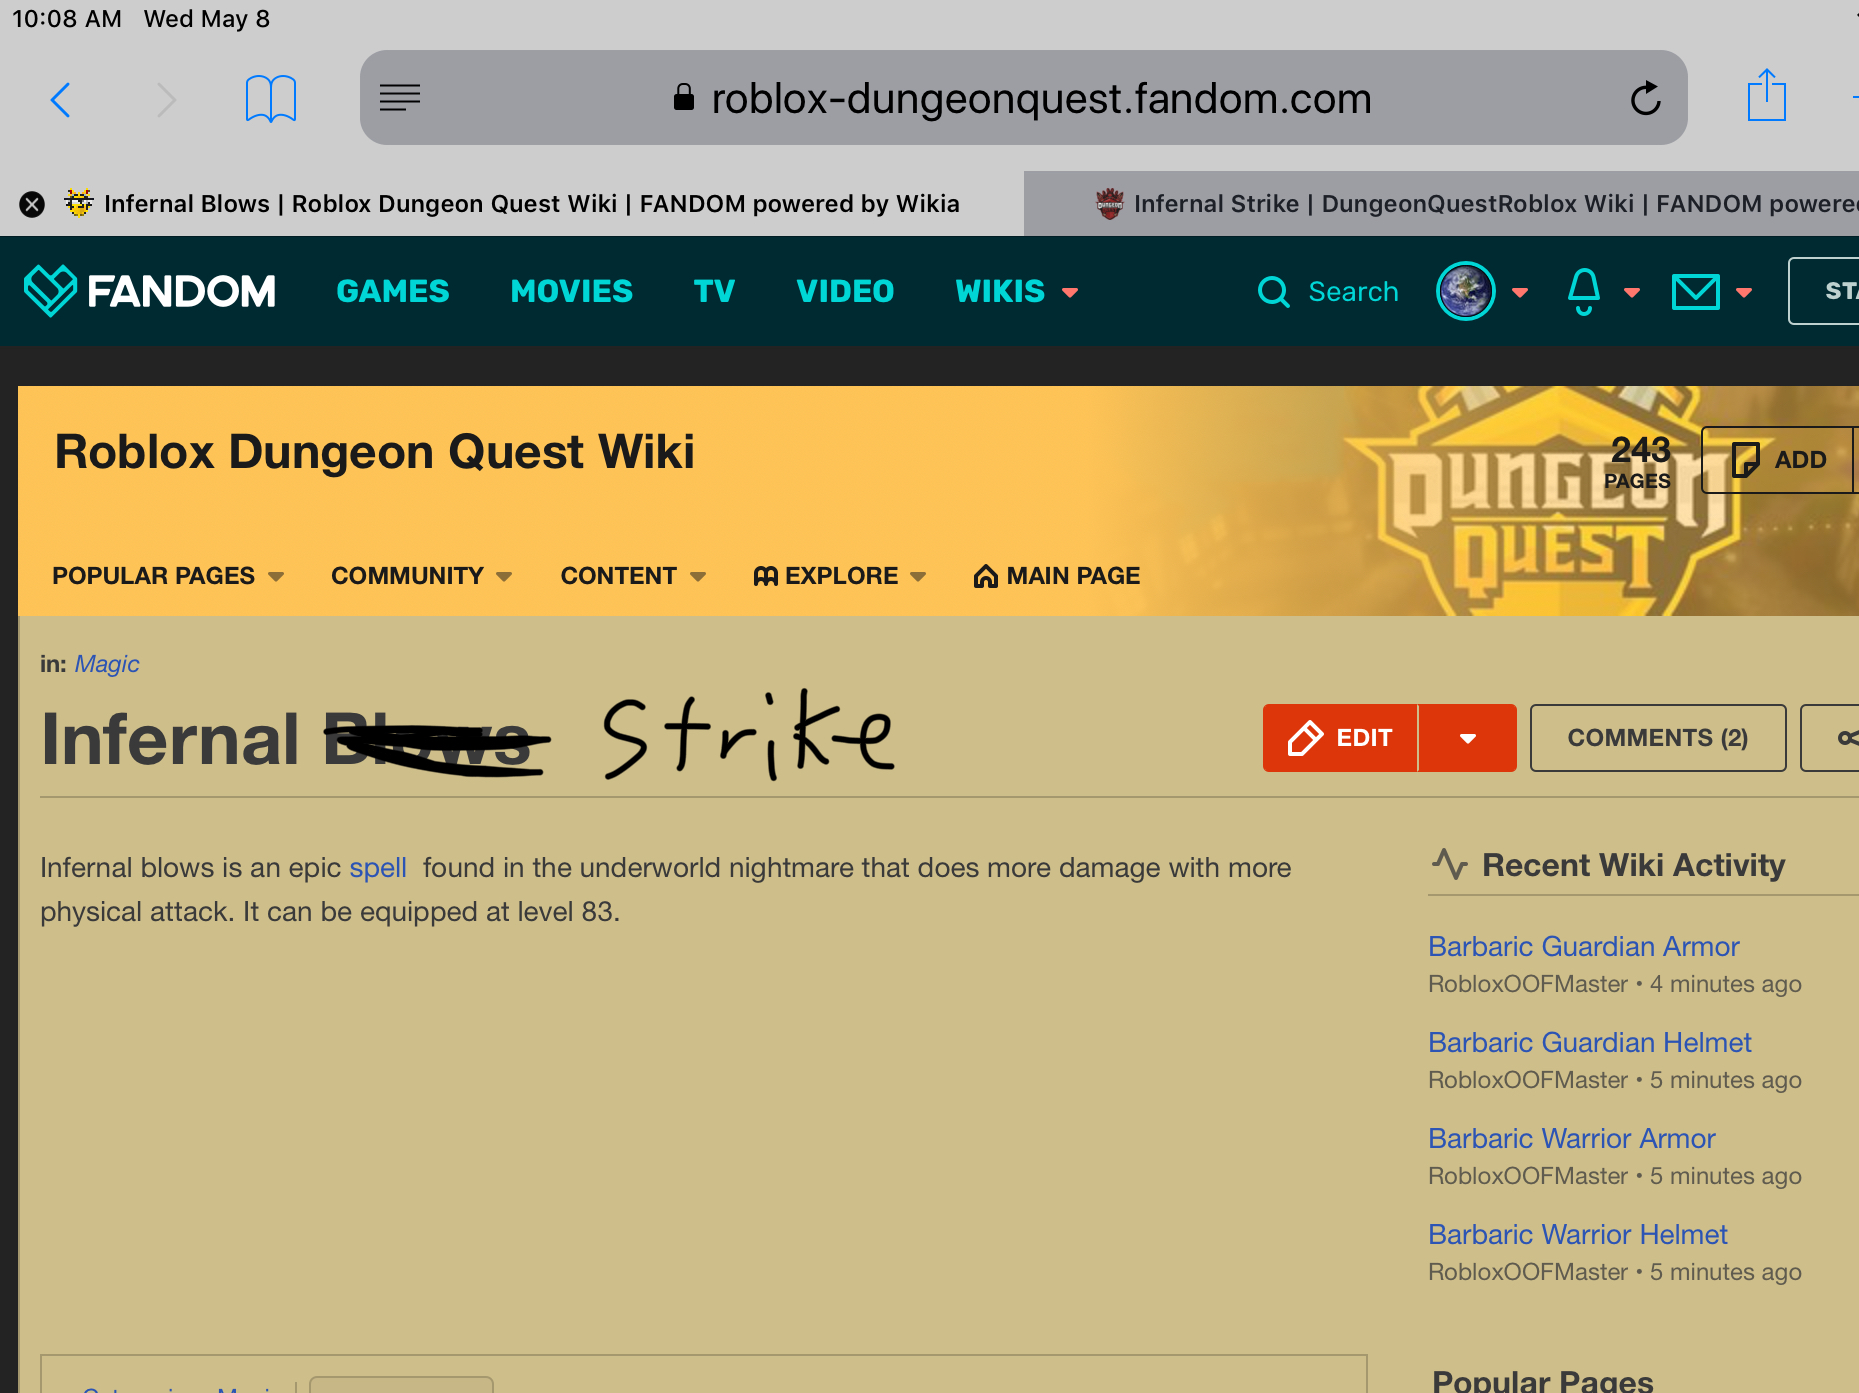 Discuss Everything About Roblox Dungeon Quest Wiki Fandom - wrong name it s infernal strike